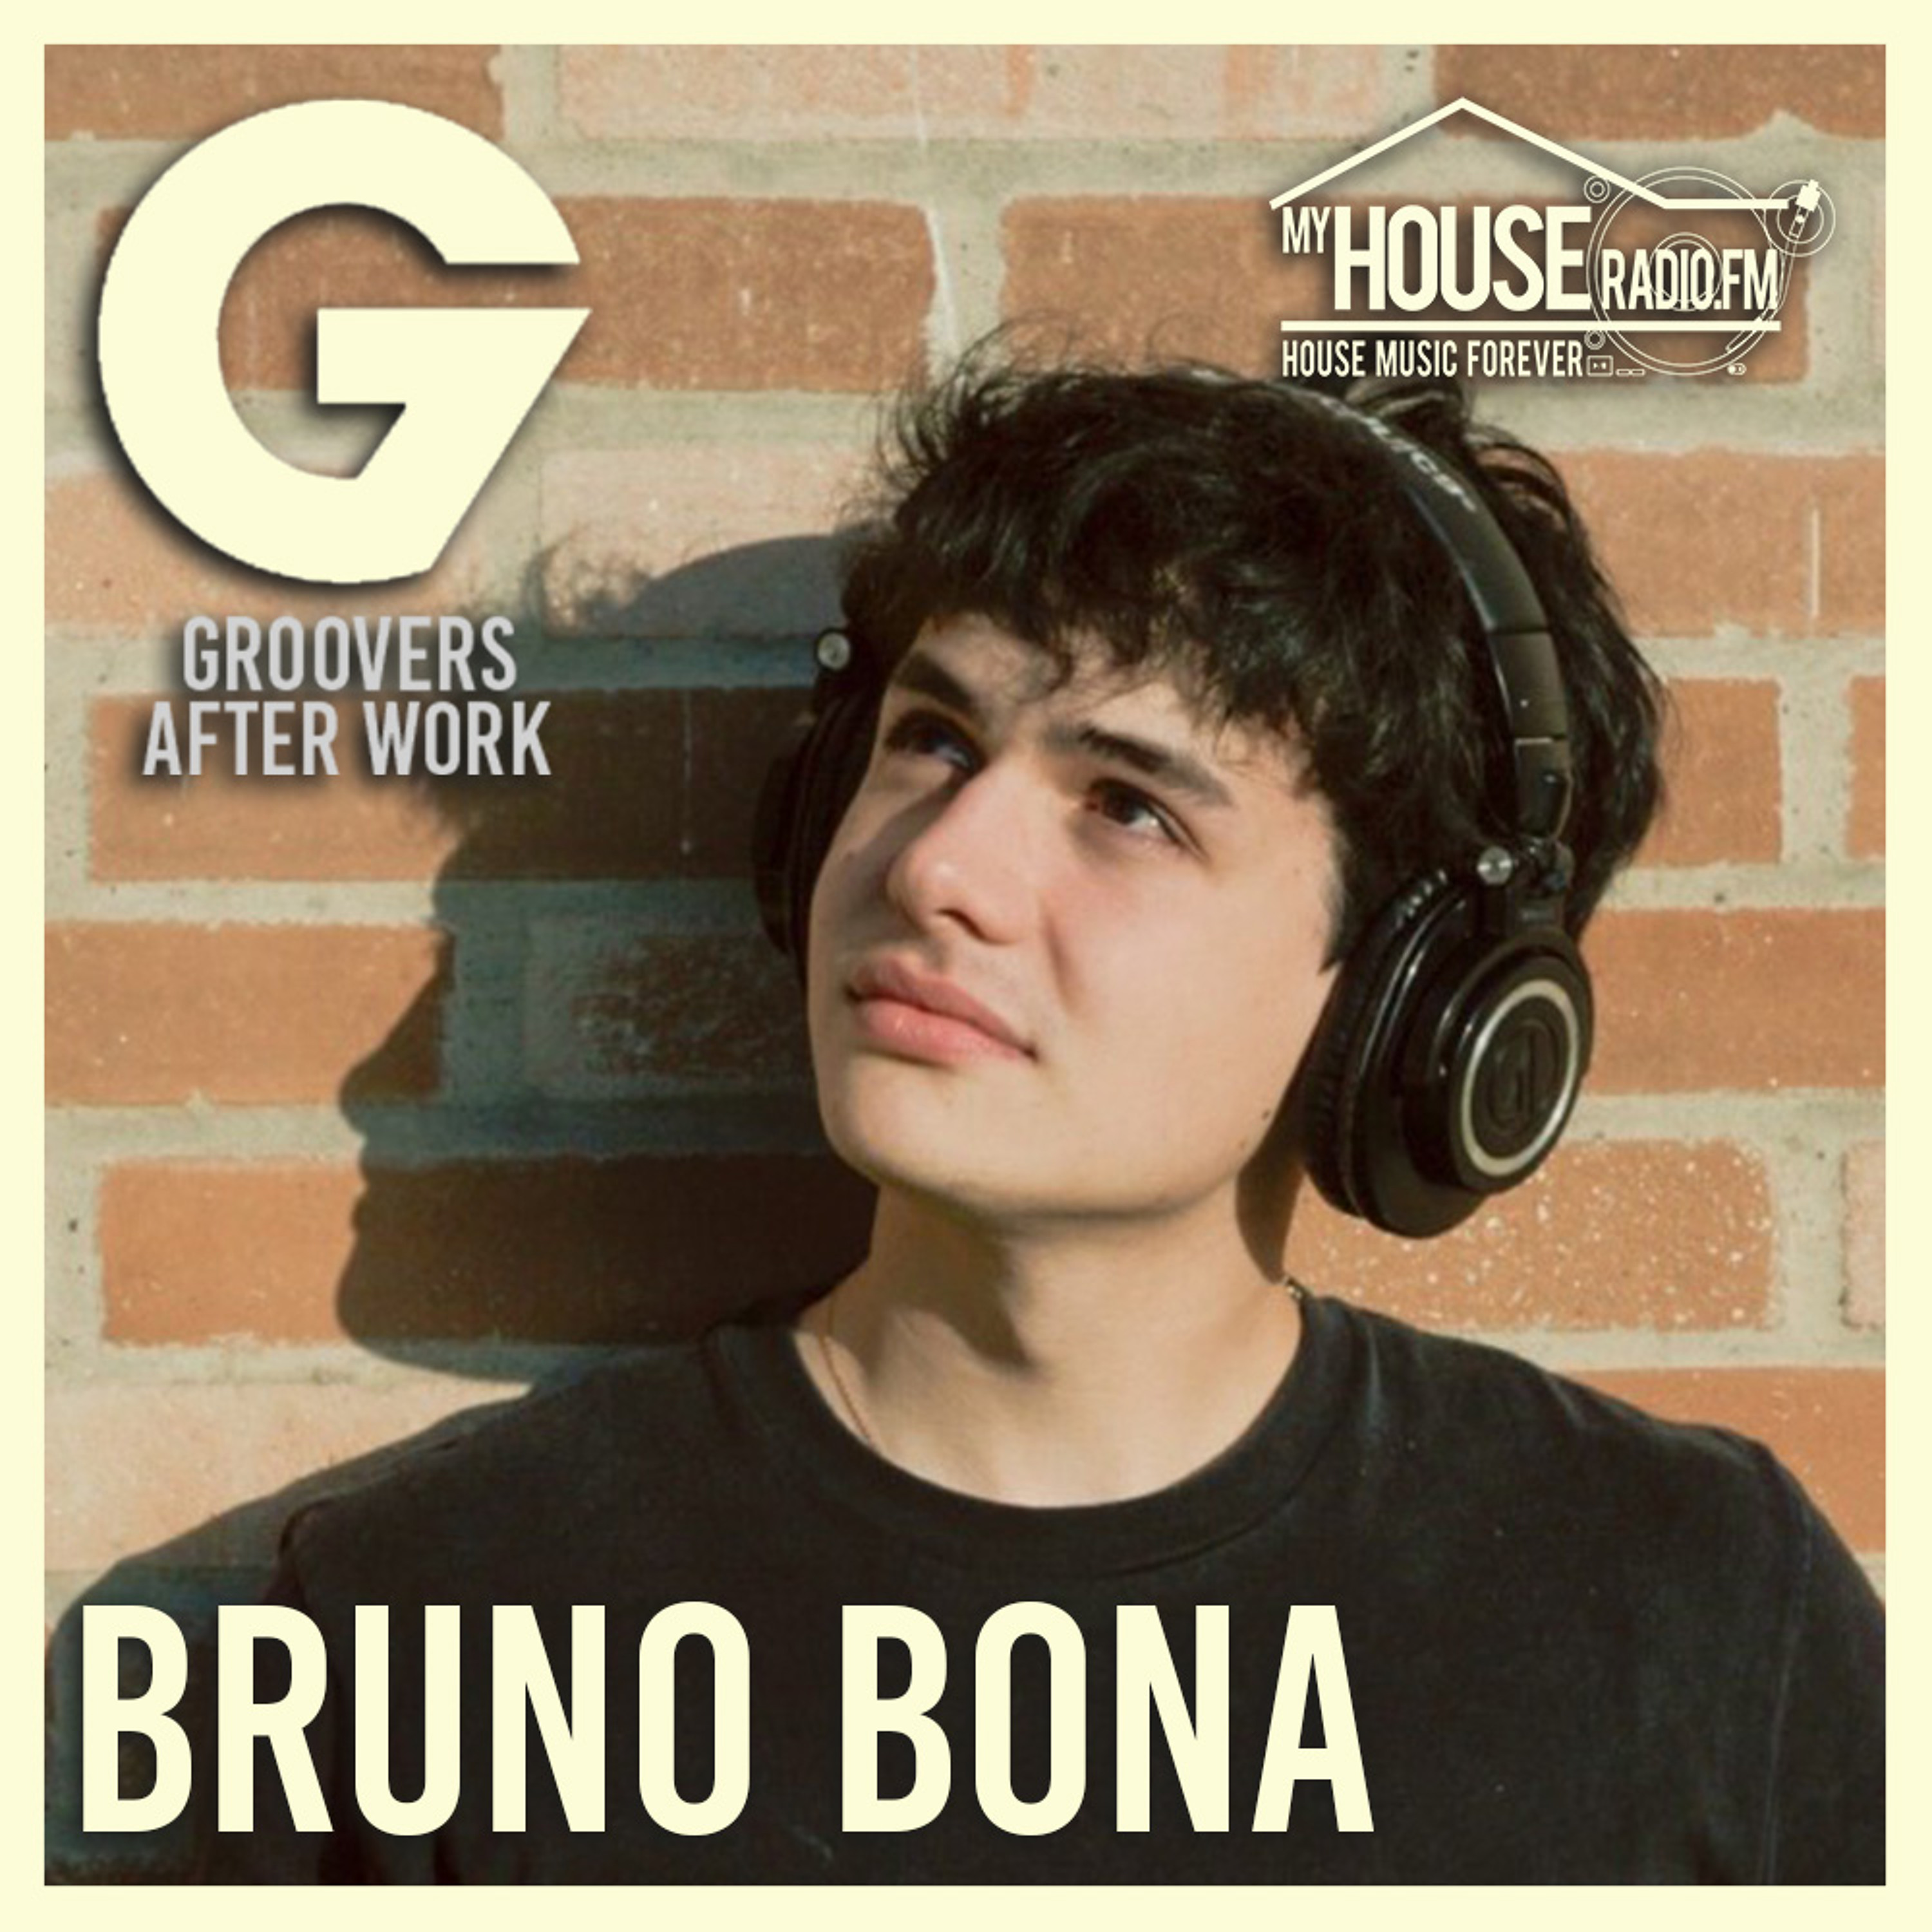 23#14-1 After Work On My House Radio By Bruno Bona